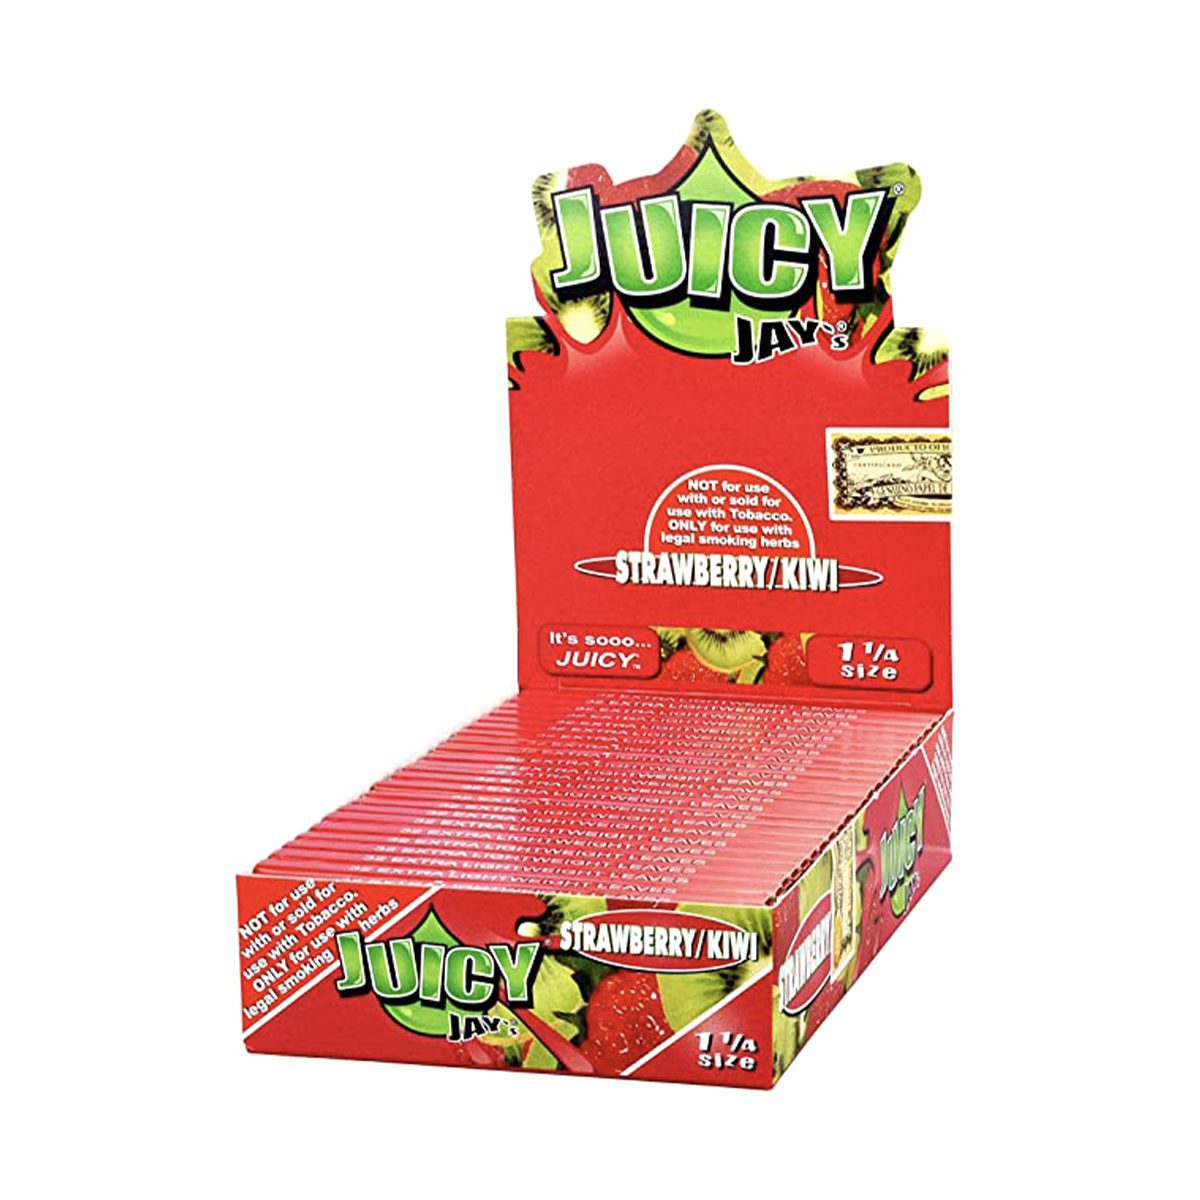 Untitled-1.Strawberry Kiwi Rolling Paper By Juicy Jay’s